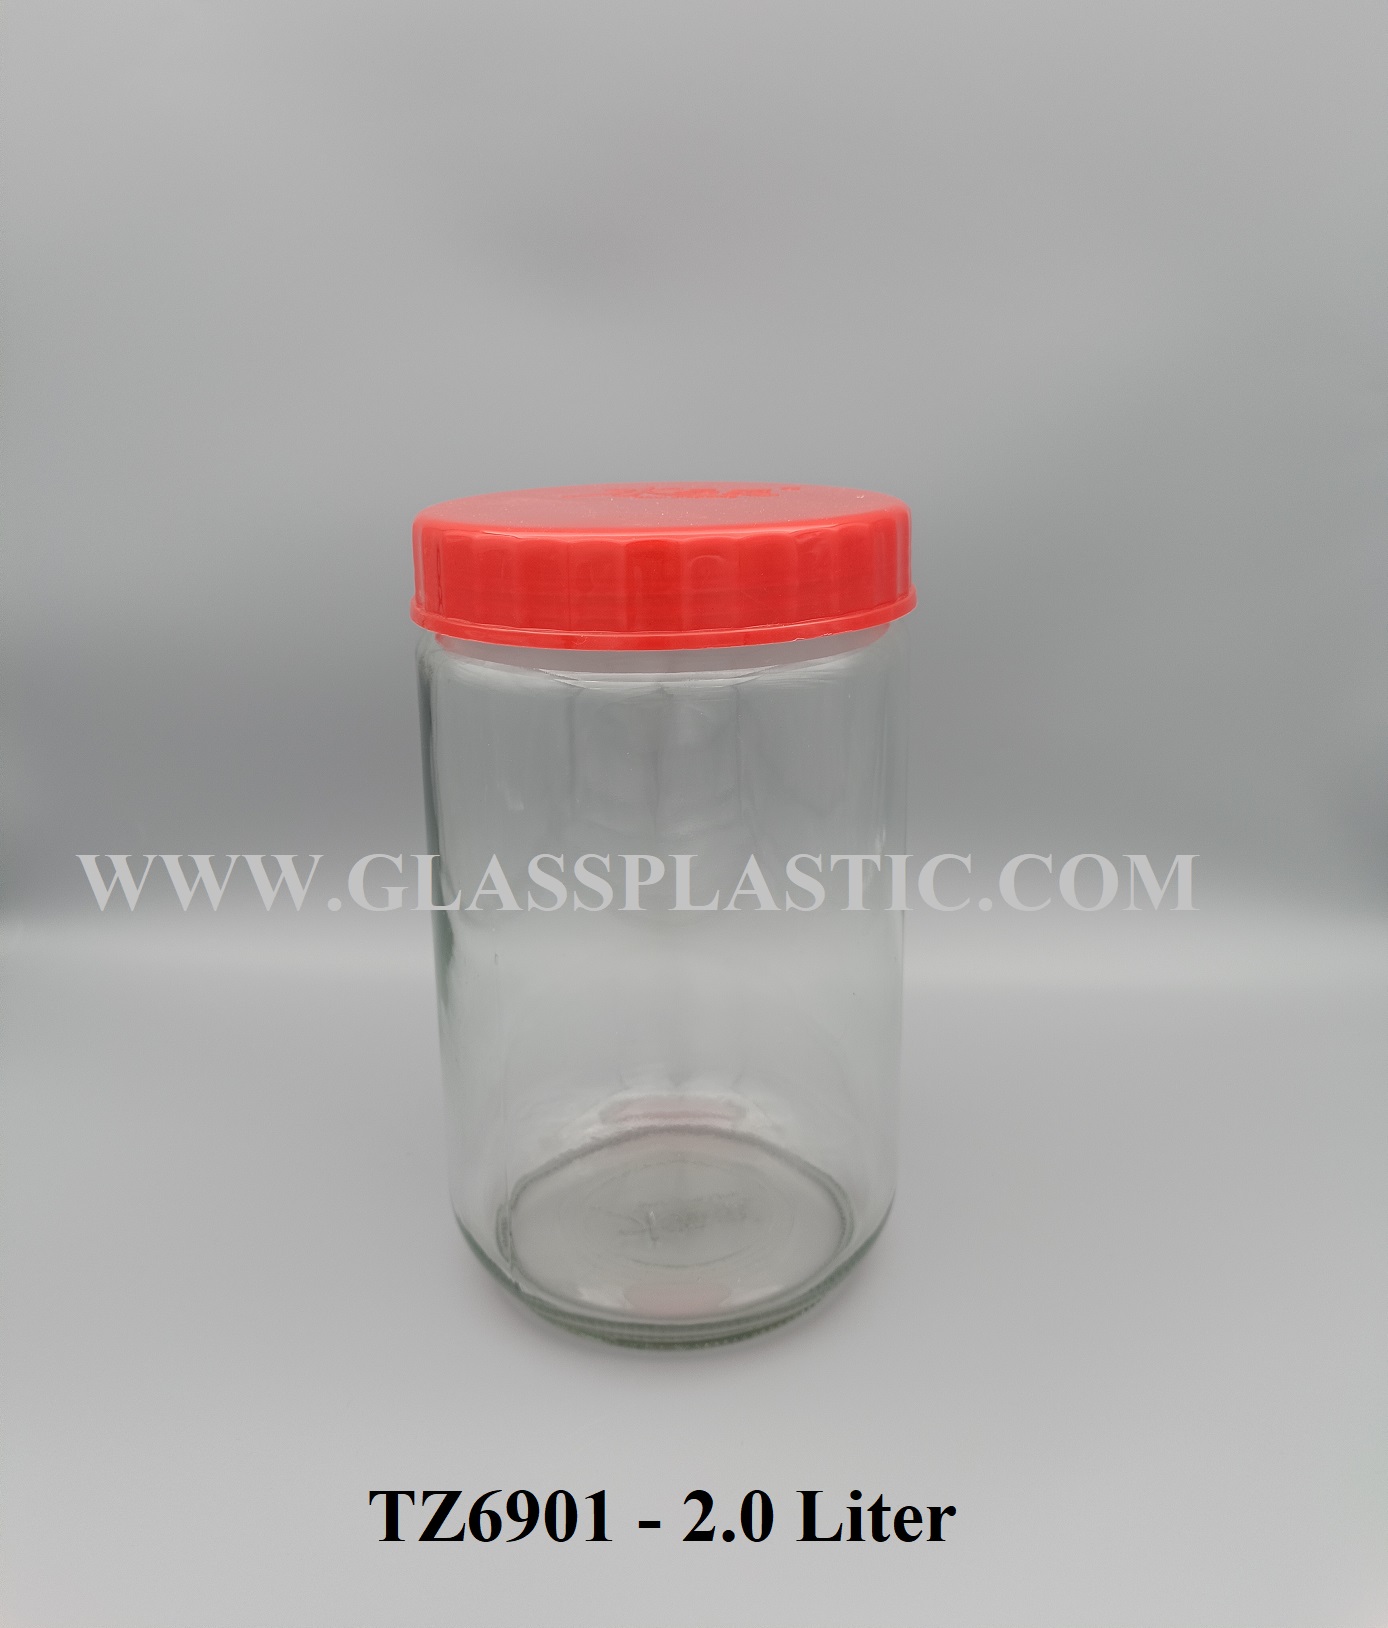 Glass Jar with Red Cap – 2.0 Liter